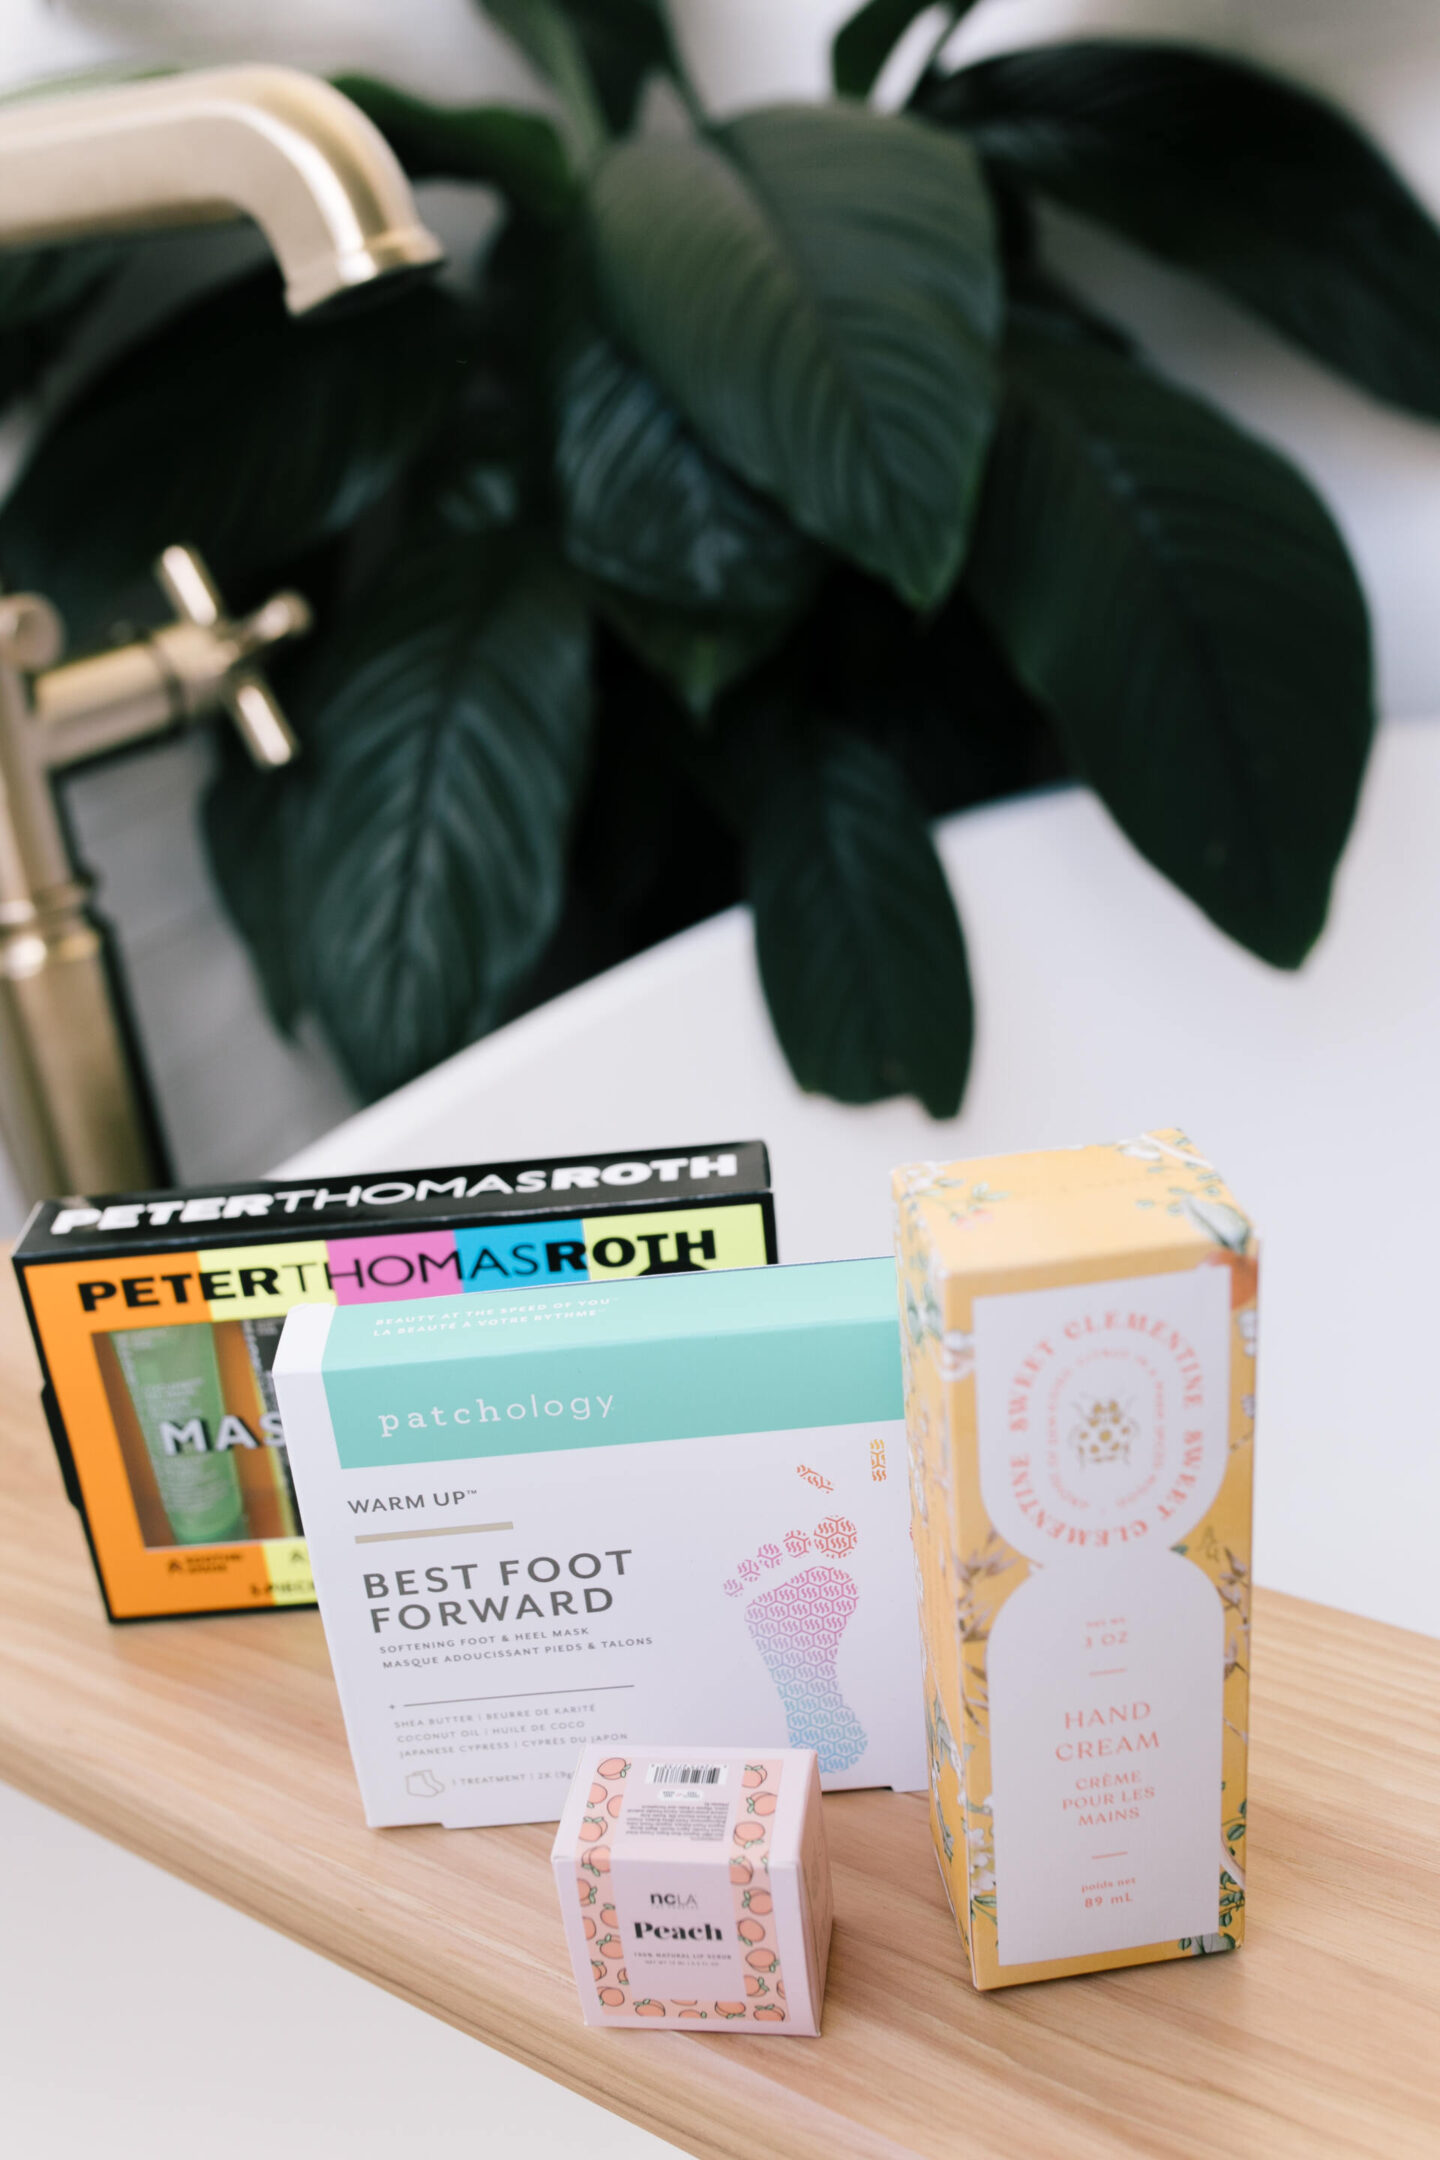 Anthropologie Sale by popular Nashville life and style blog, Hello Happiness: image of Peter Thomas Roth mask set, Patcholog Best Foot Forward, NCLA peach balm, and hand cream. 